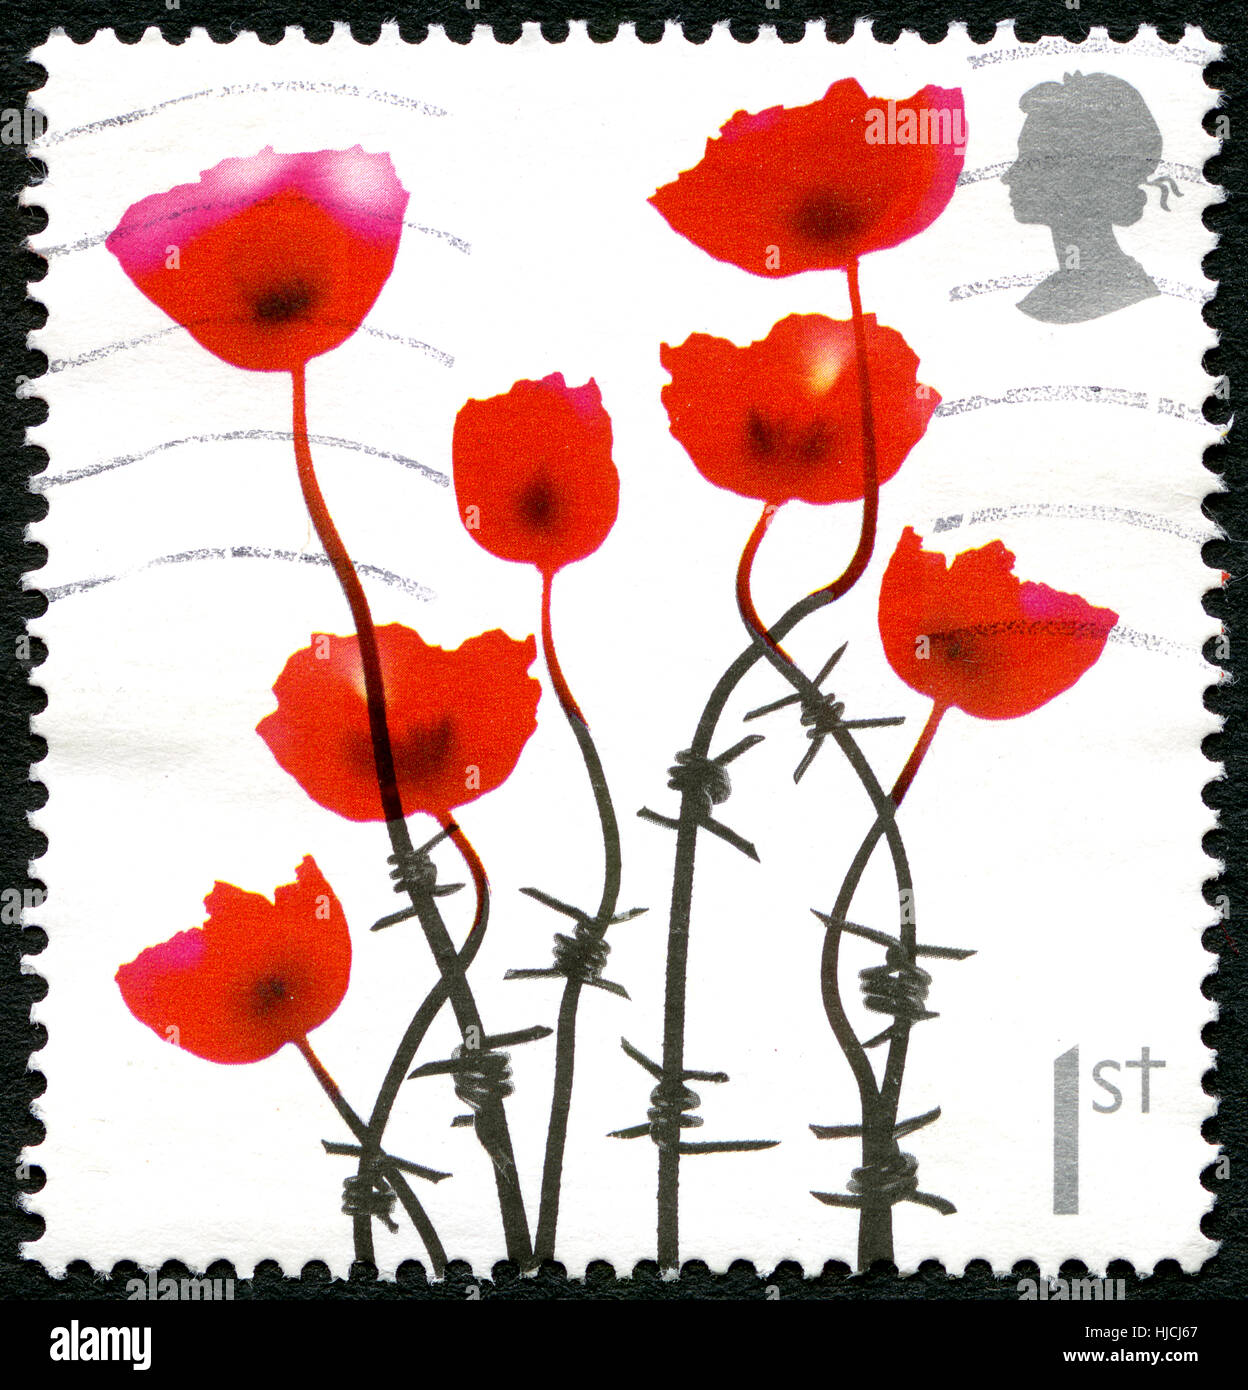 UNITED KINGDOM - CIRCA 2008: A used postage stamp from the UK, depicting an illustration of poppies emerging from barbed wire to commemorate the falle Stock Photo